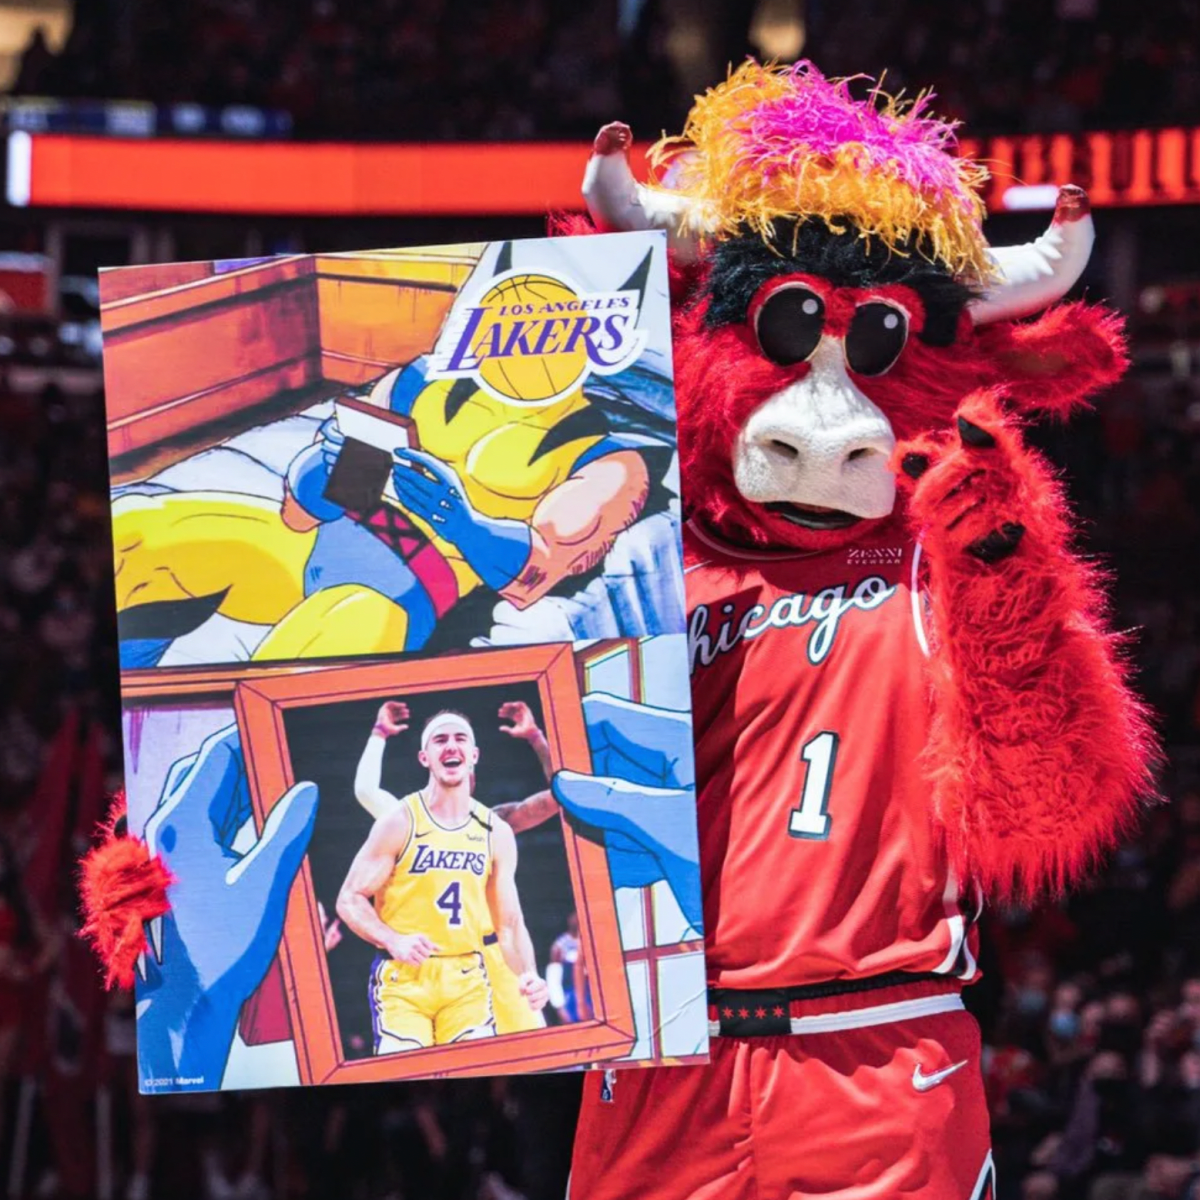 I asked an AI to show me a picture of the Chicago bulls mascot if